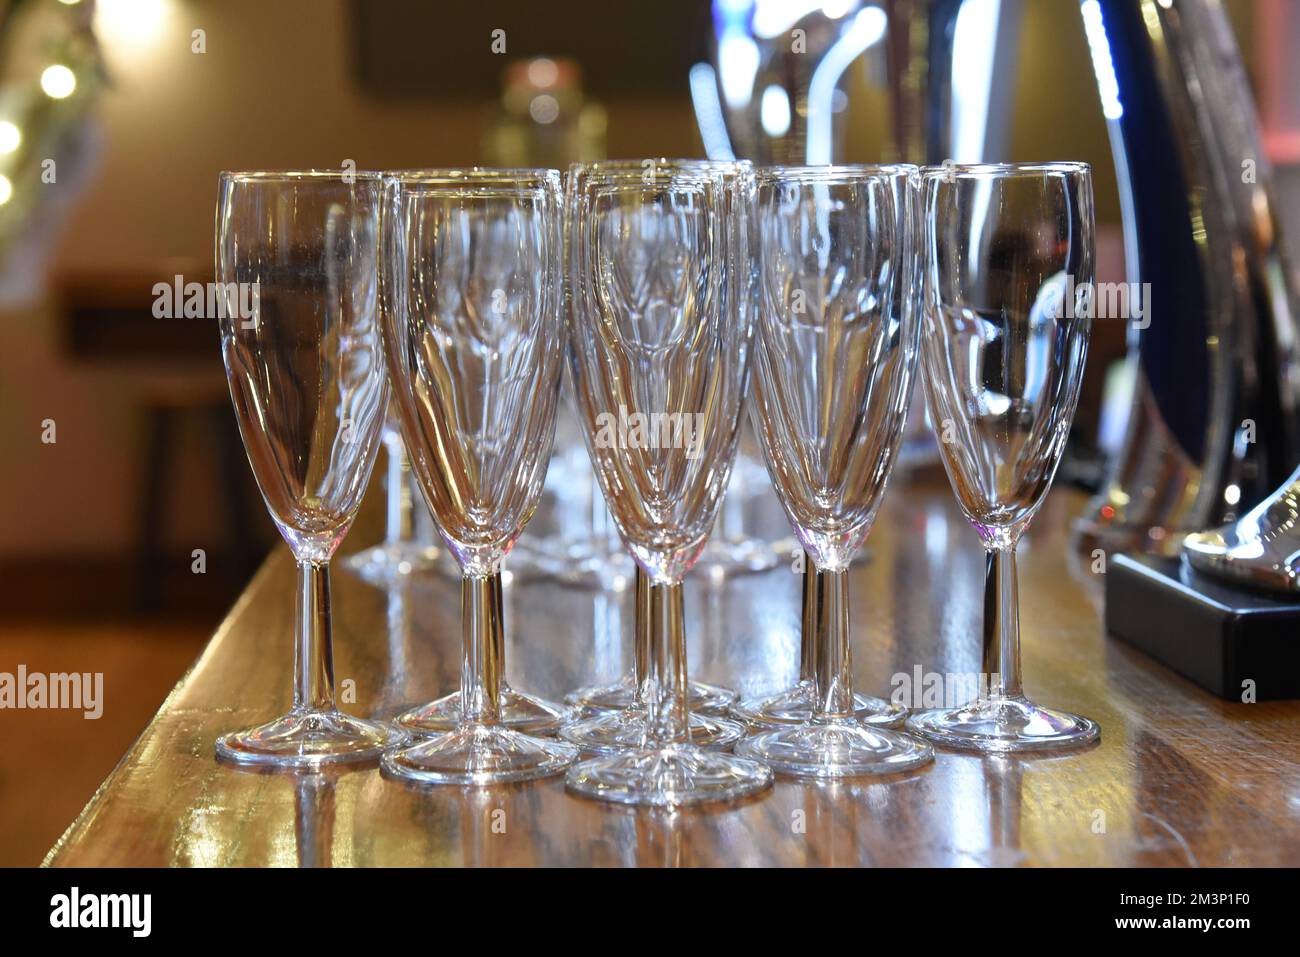 Empty champagne glasses on a bar Stock Photo